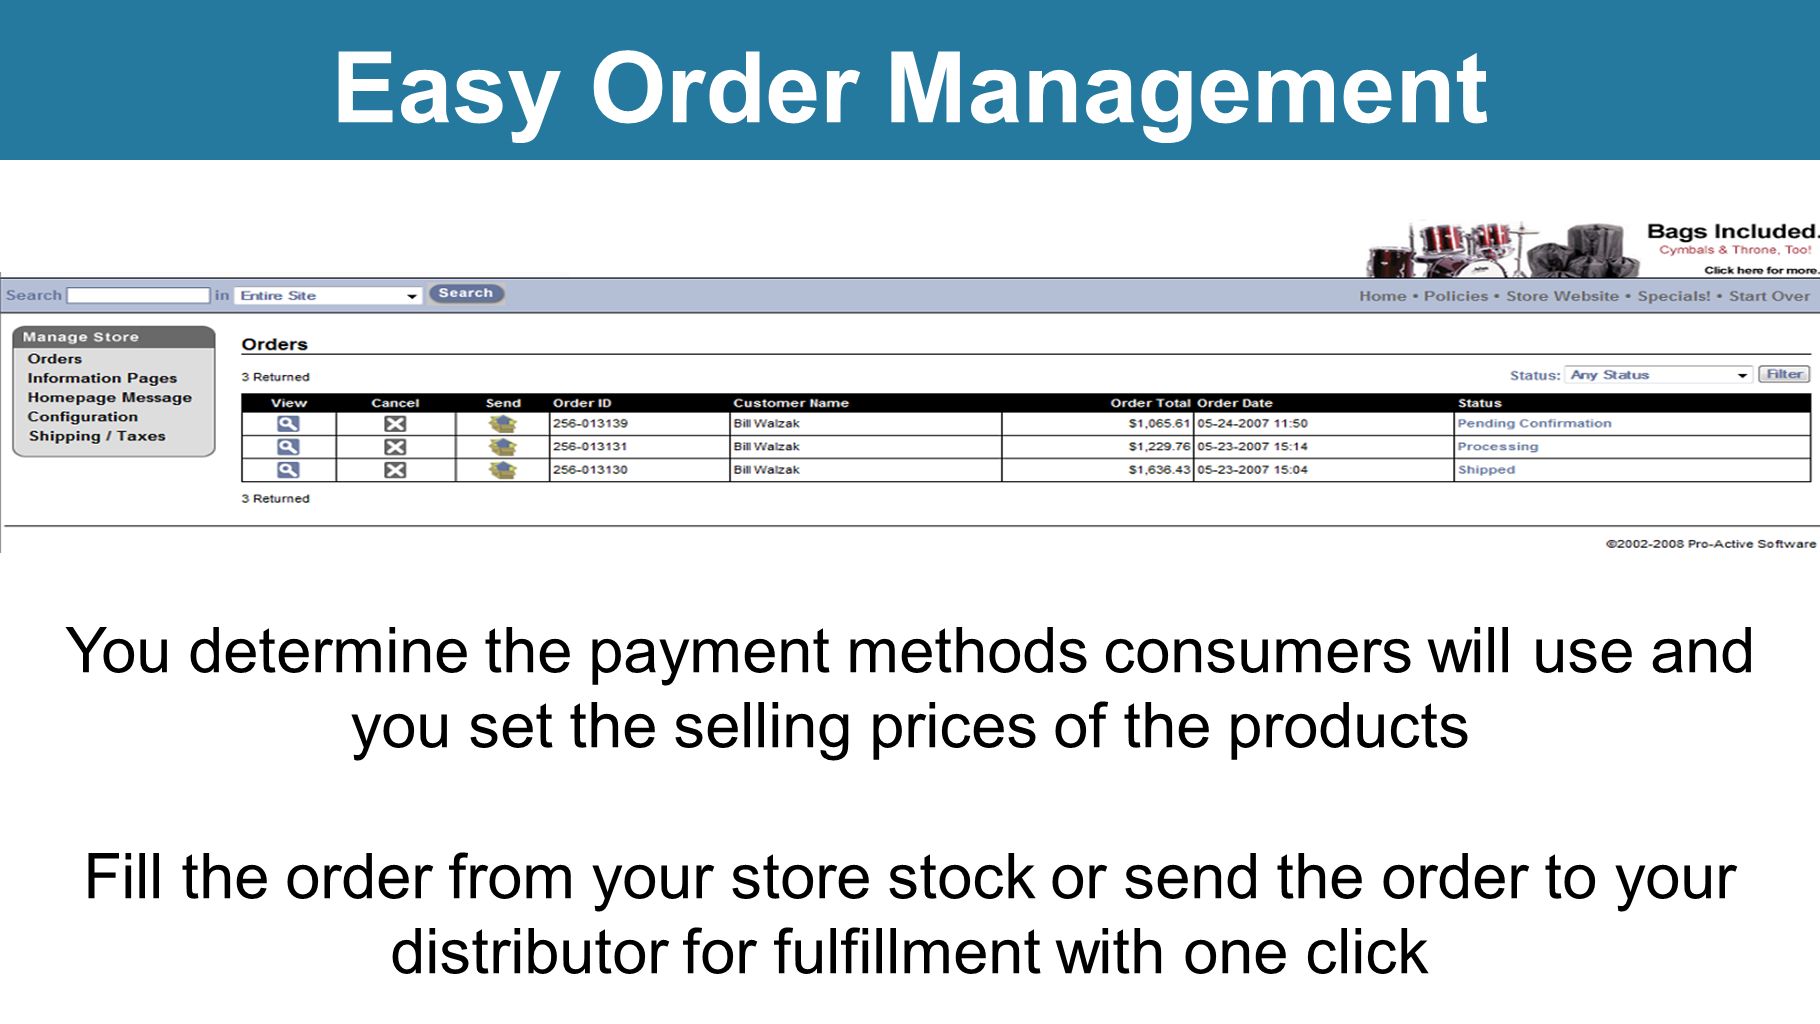 Easy Order Management You determine the payment methods consumers will use and you set the selling prices of the products Fill the order from your store stock or send the order to your distributor for fulfillment with one click